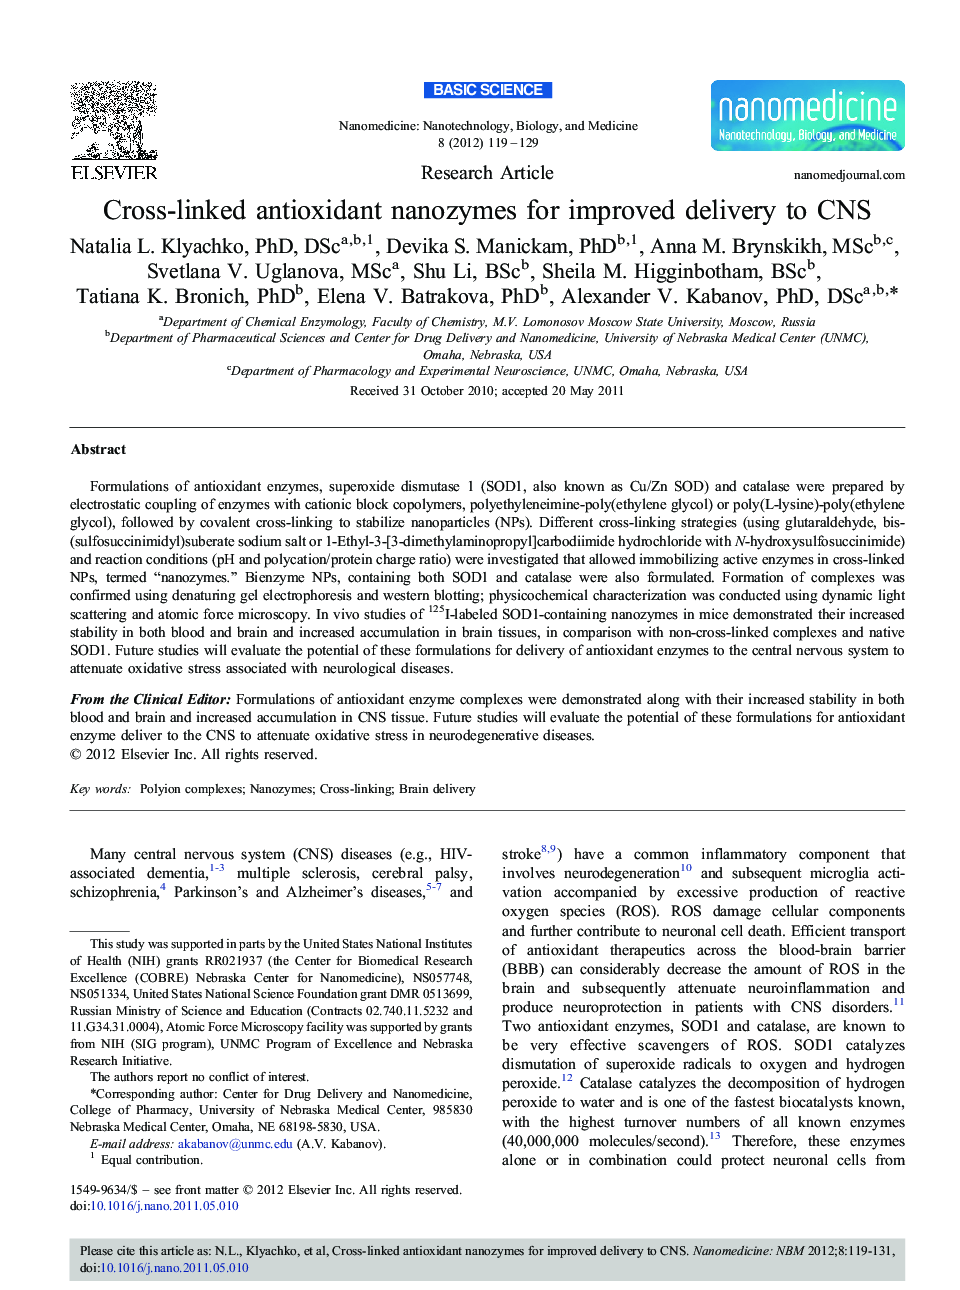 Cross-linked antioxidant nanozymes for improved delivery to CNS 